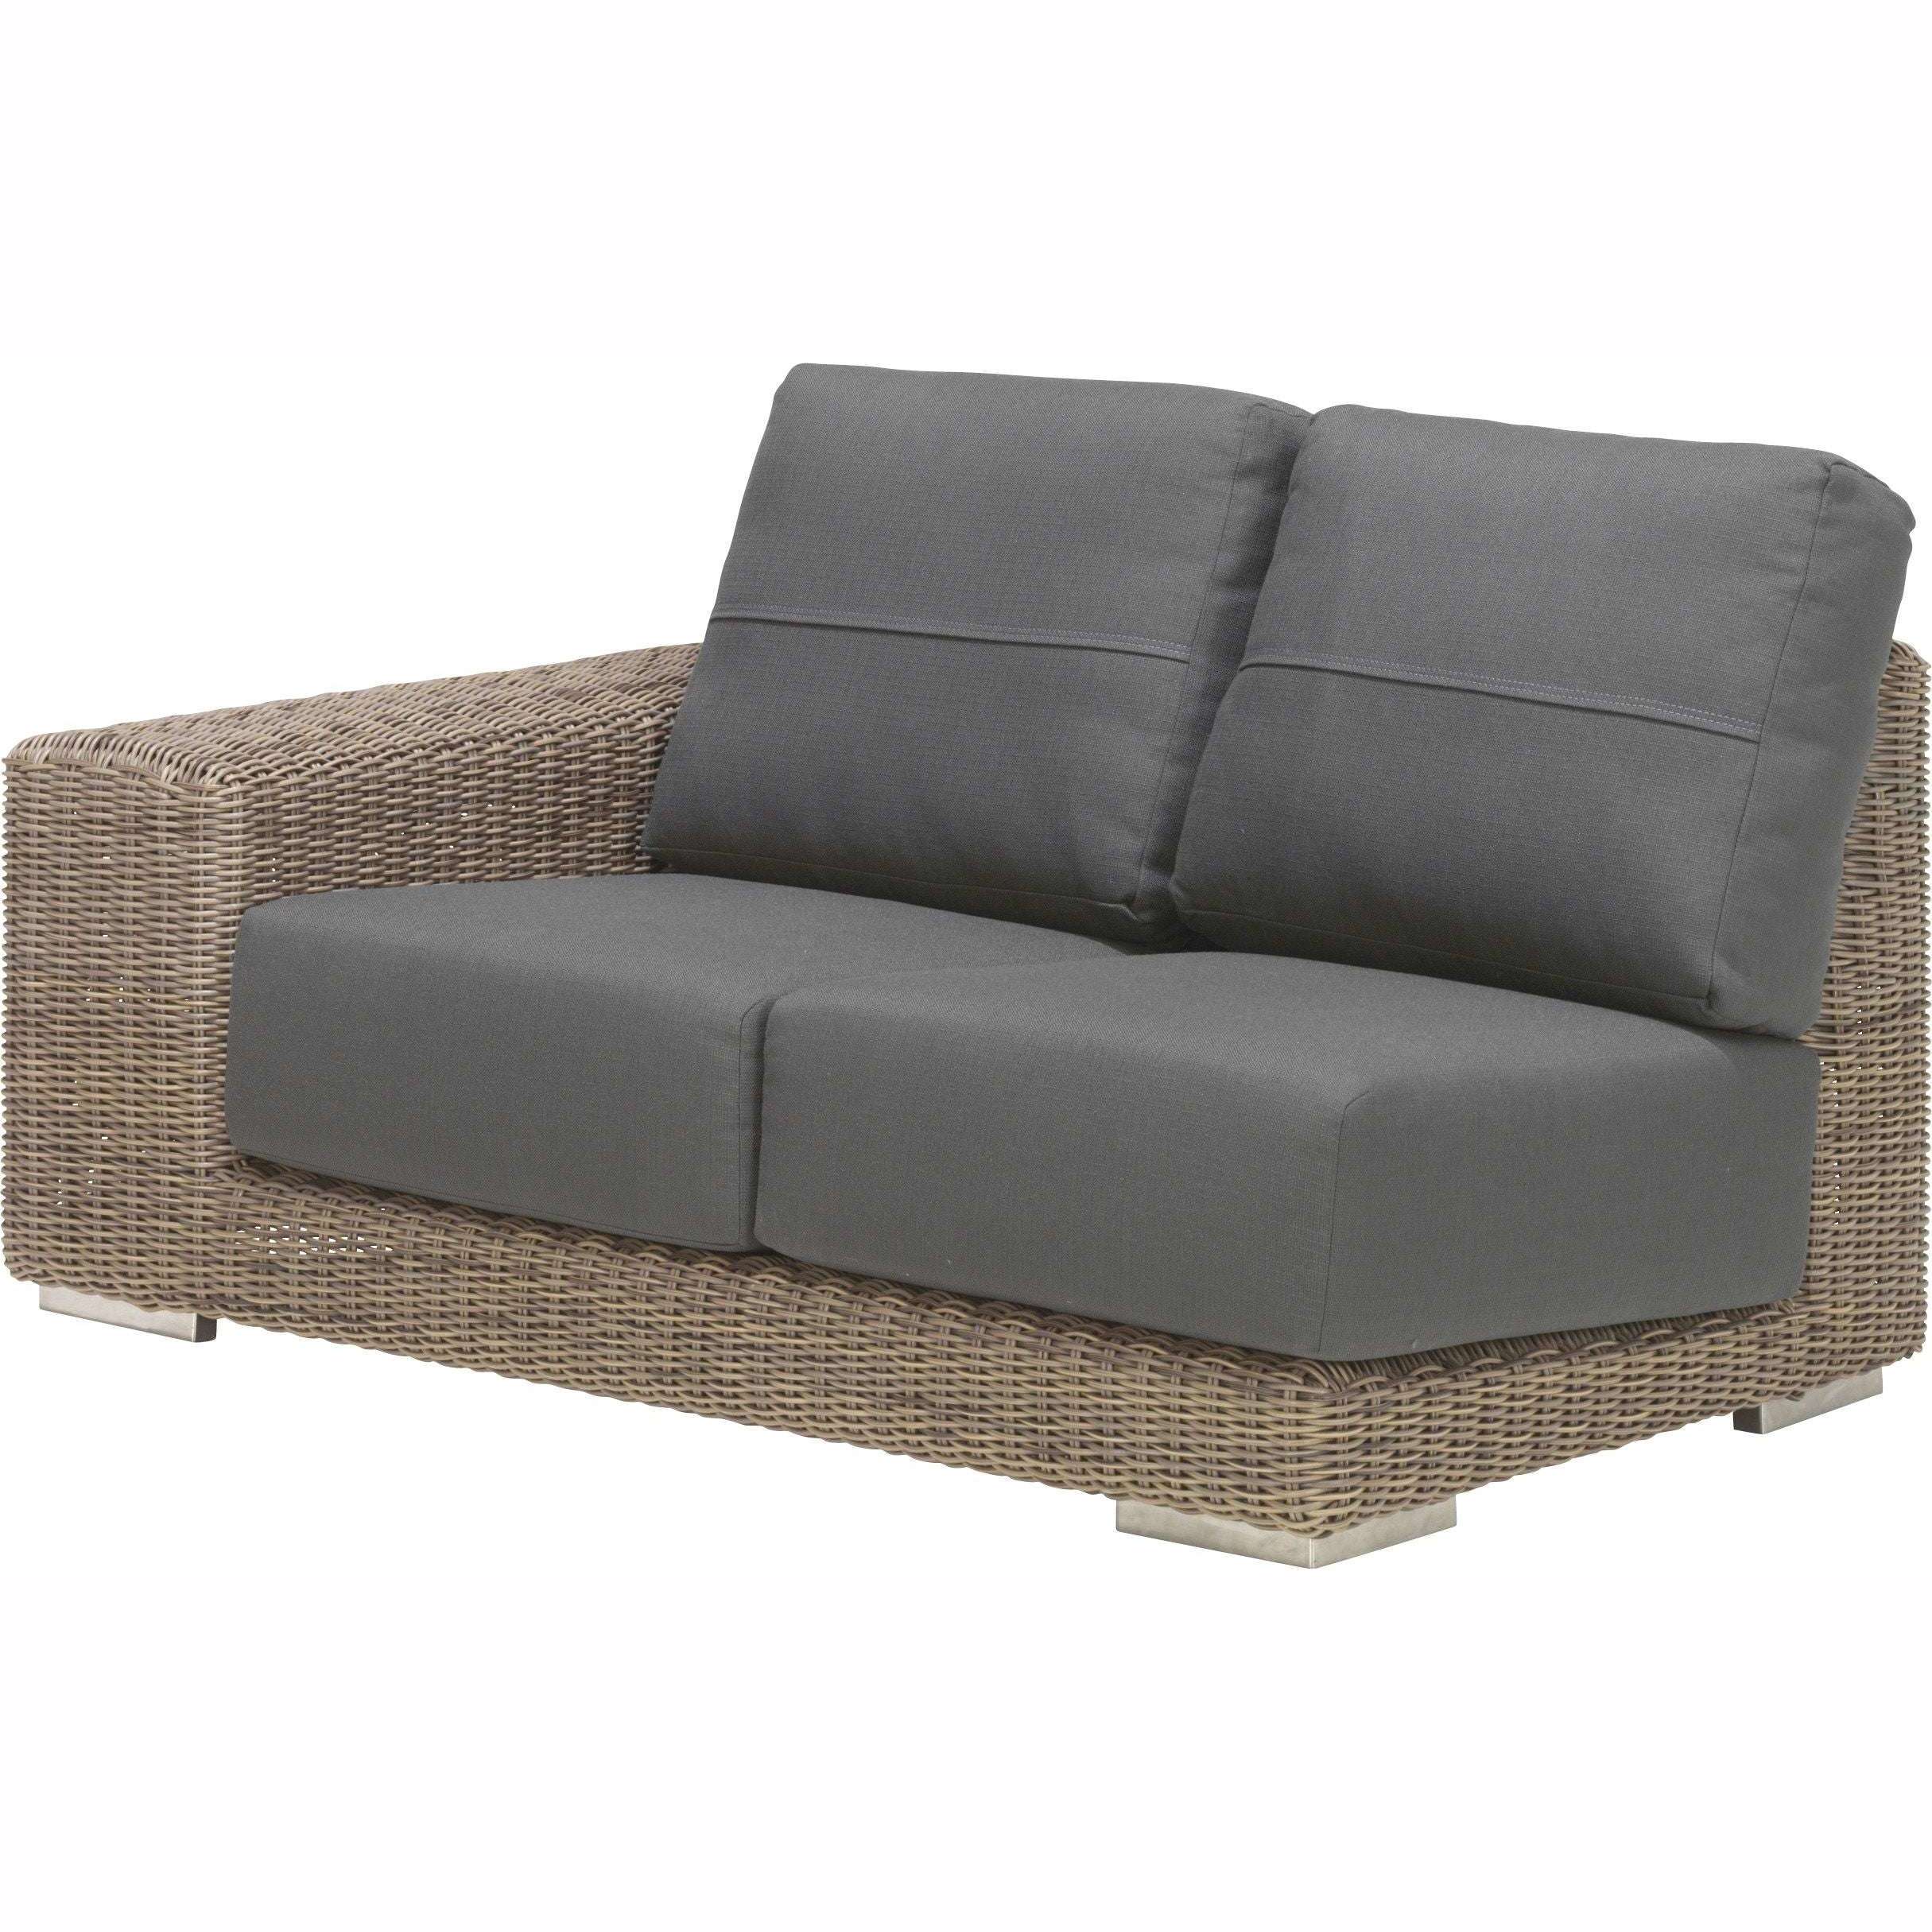 Exceptional Garden:4 Seasons Outdoor Kingston Corner Lounge Set and Kingston Coffee Table with Glass Top